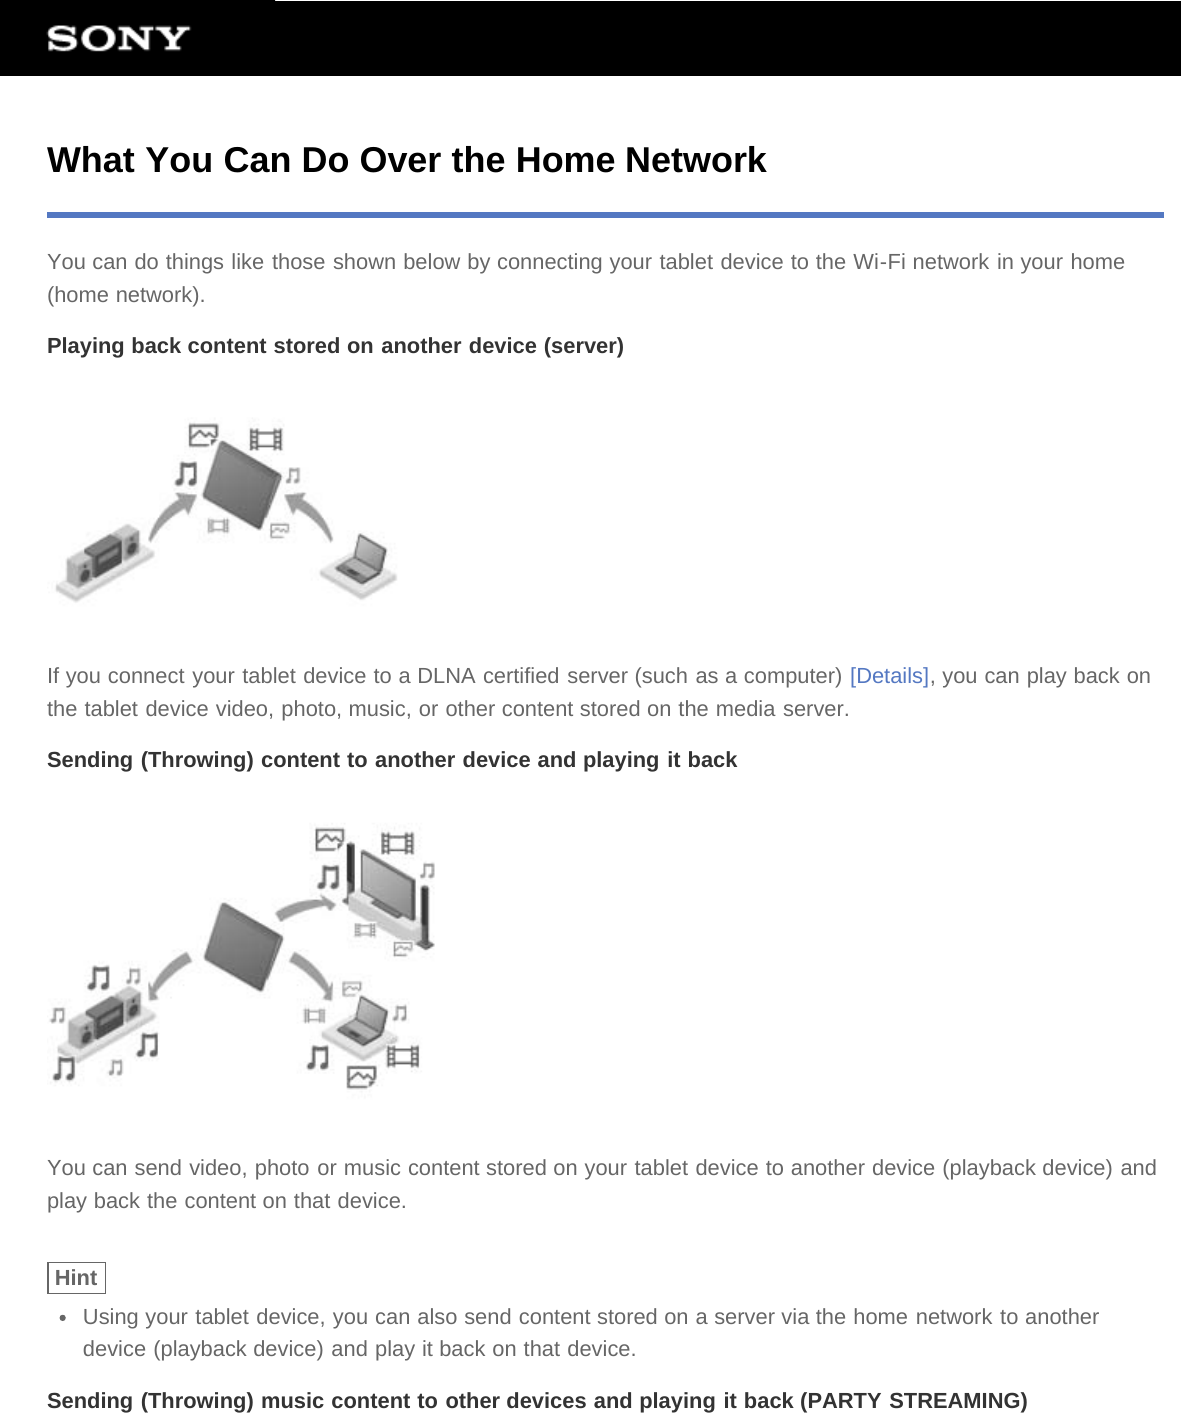 What You Can Do Over the Home NetworkYou can do things like those shown below by connecting your tablet device to the Wi-Fi network in your home(home network).Playing back content stored on another device (server)If you connect your tablet device to a DLNA certified server (such as a computer) [Details], you can play back onthe tablet device video, photo, music, or other content stored on the media server.Sending (Throwing) content to another device and playing it backYou can send video, photo or music content stored on your tablet device to another device (playback device) andplay back the content on that device.HintUsing your tablet device, you can also send content stored on a server via the home network to anotherdevice (playback device) and play it back on that device.Sending (Throwing) music content to other devices and playing it back (PARTY STREAMING)